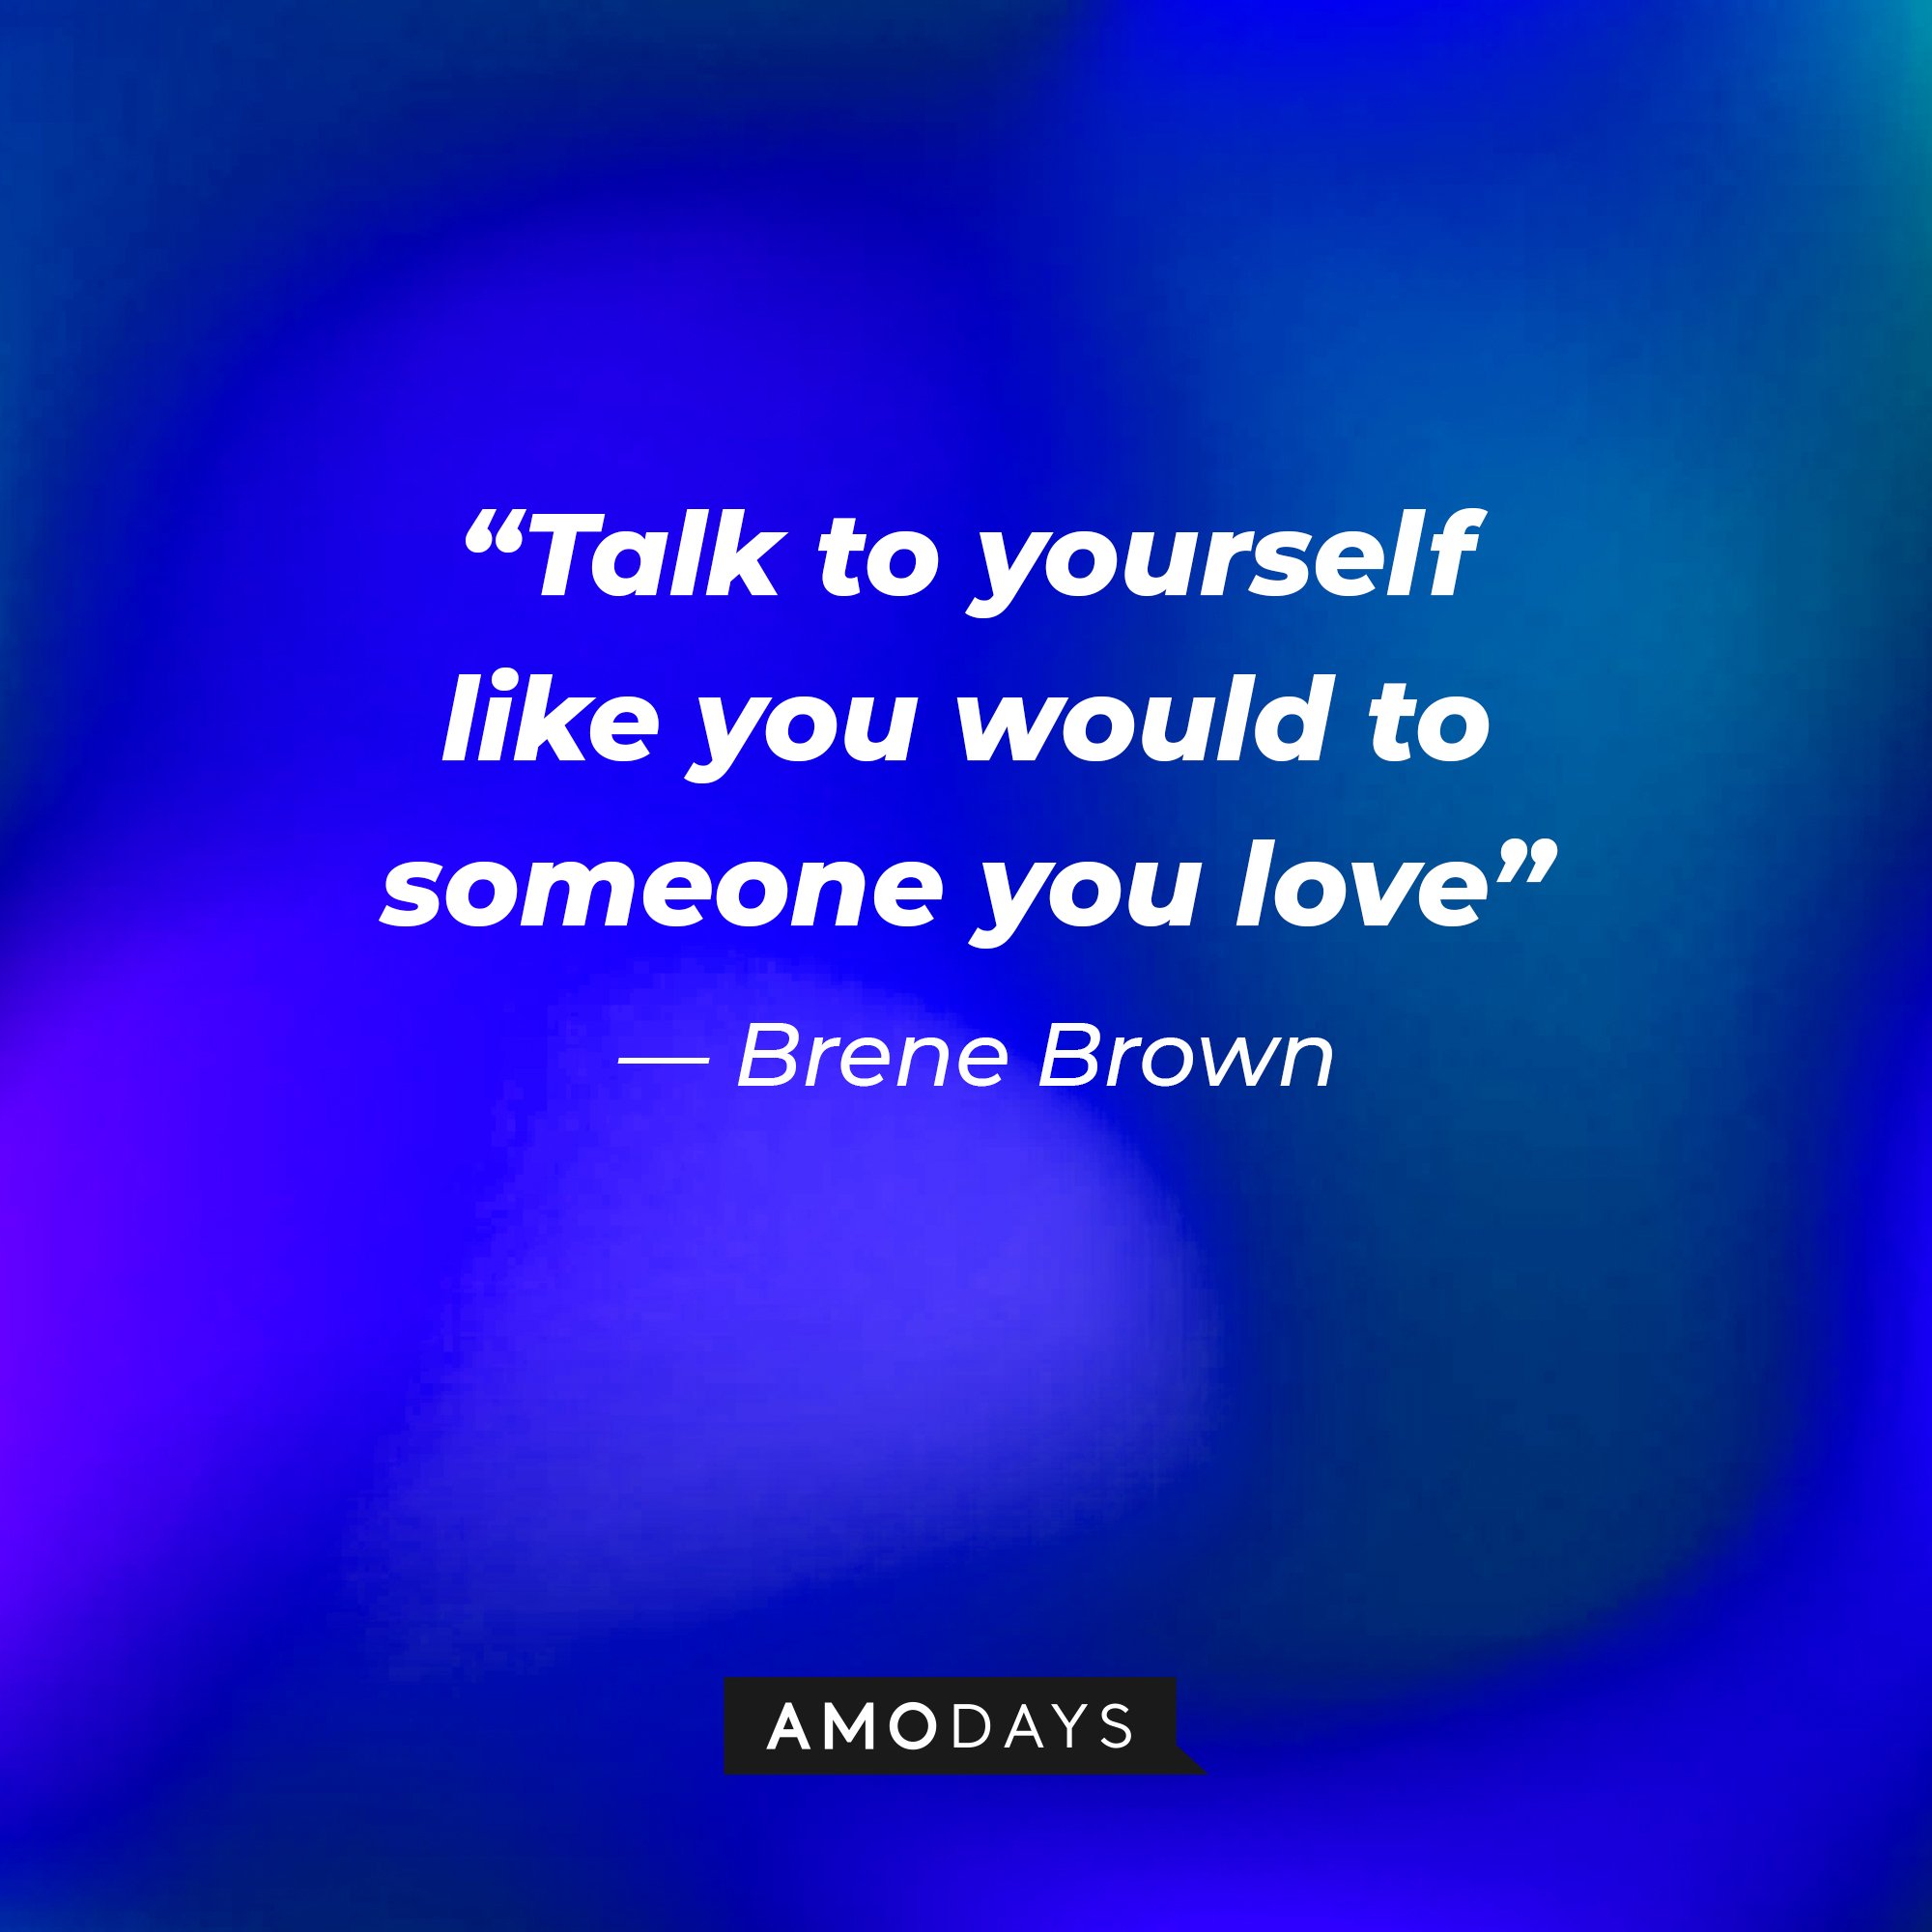 Brene Brown’s quote: "Talk to yourself like you would to someone you love." | Image: AmoDays